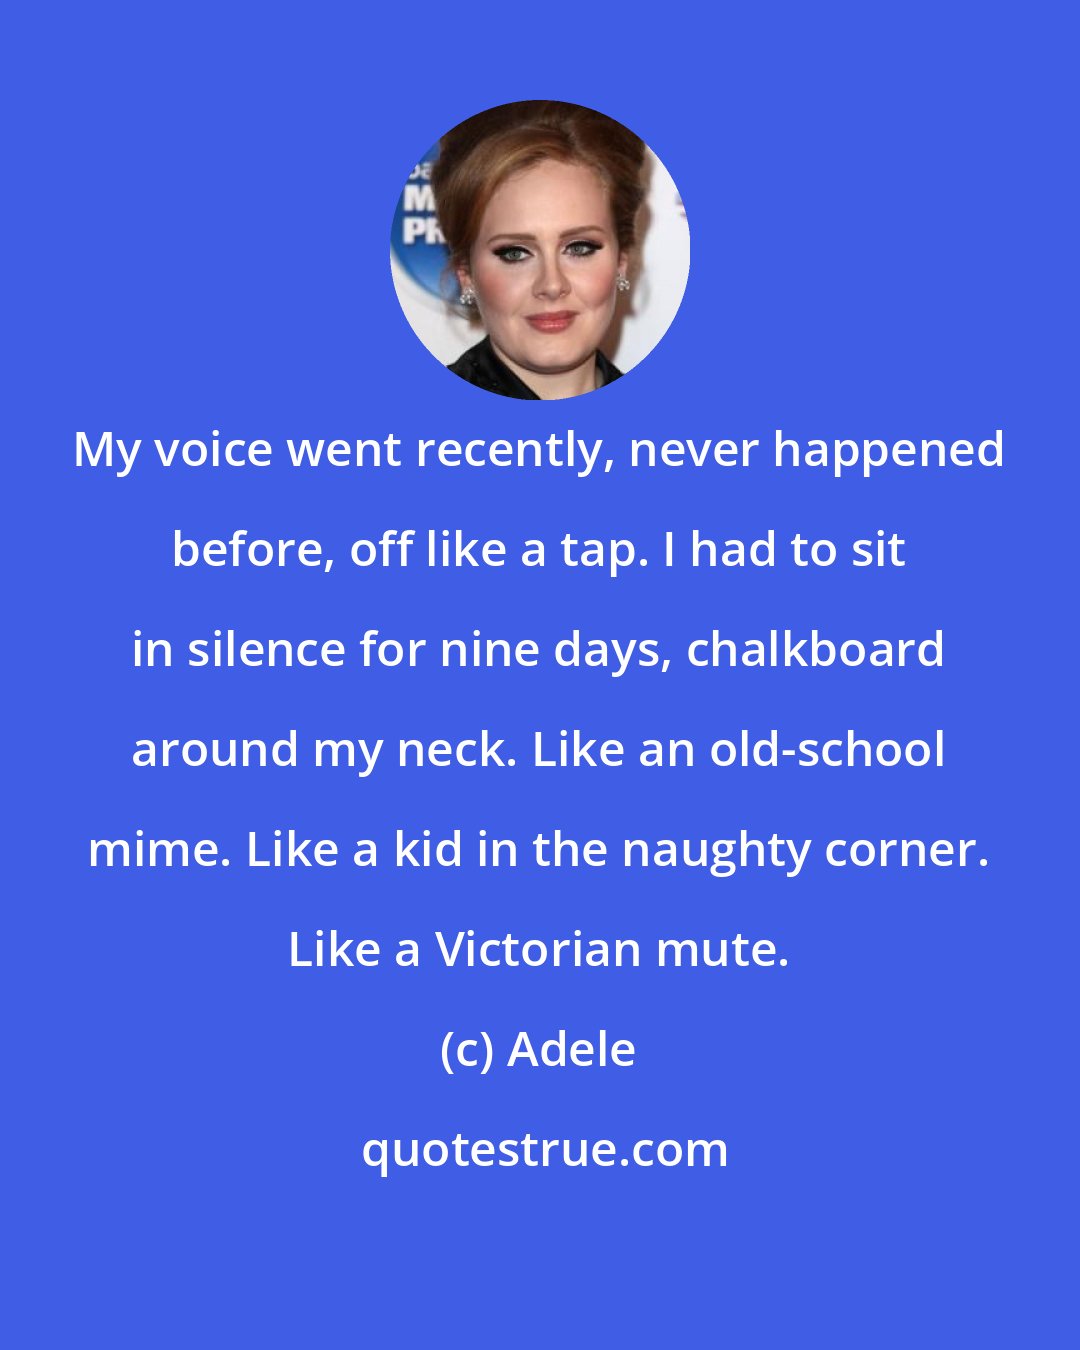 Adele: My voice went recently, never happened before, off like a tap. I had to sit in silence for nine days, chalkboard around my neck. Like an old-school mime. Like a kid in the naughty corner. Like a Victorian mute.